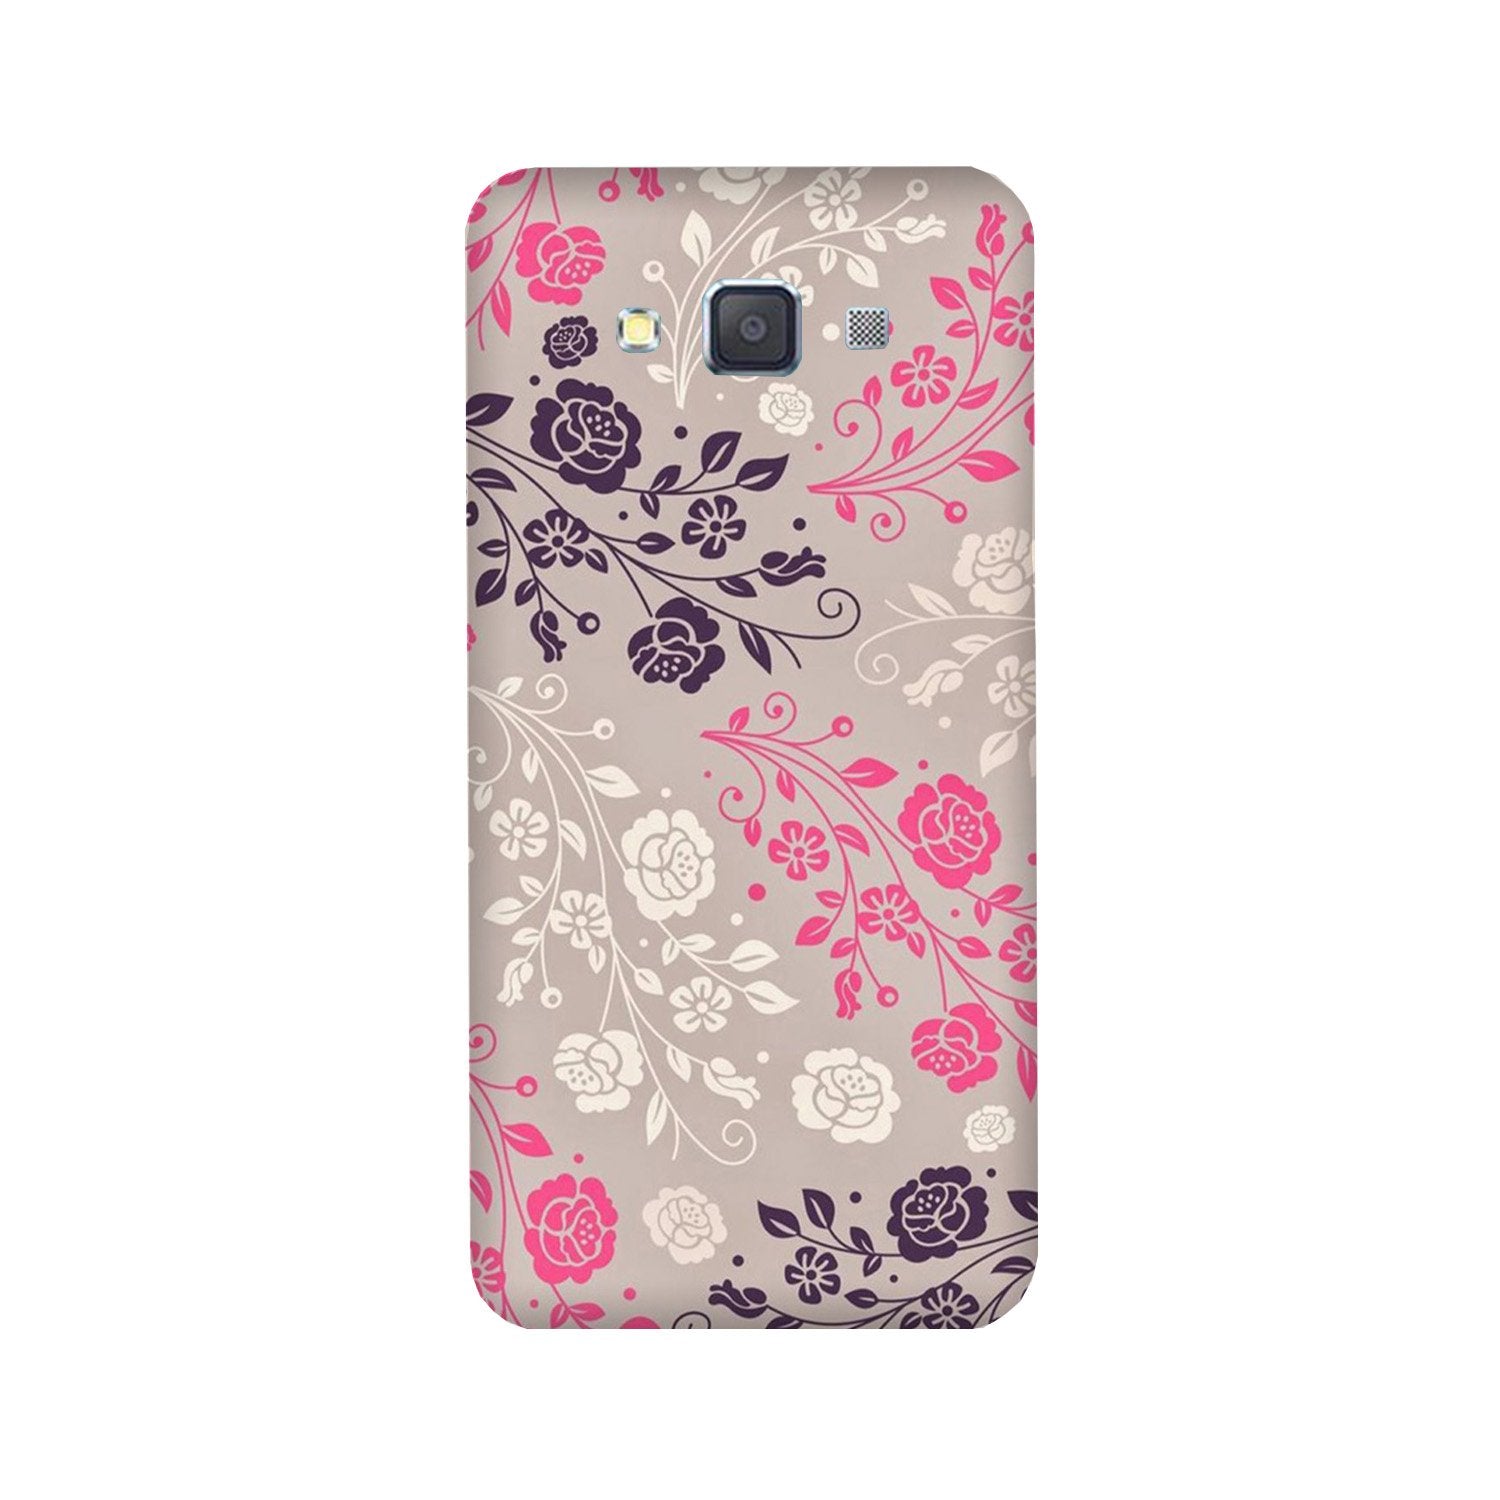 Pattern2 Case for Galaxy A5 (2015)